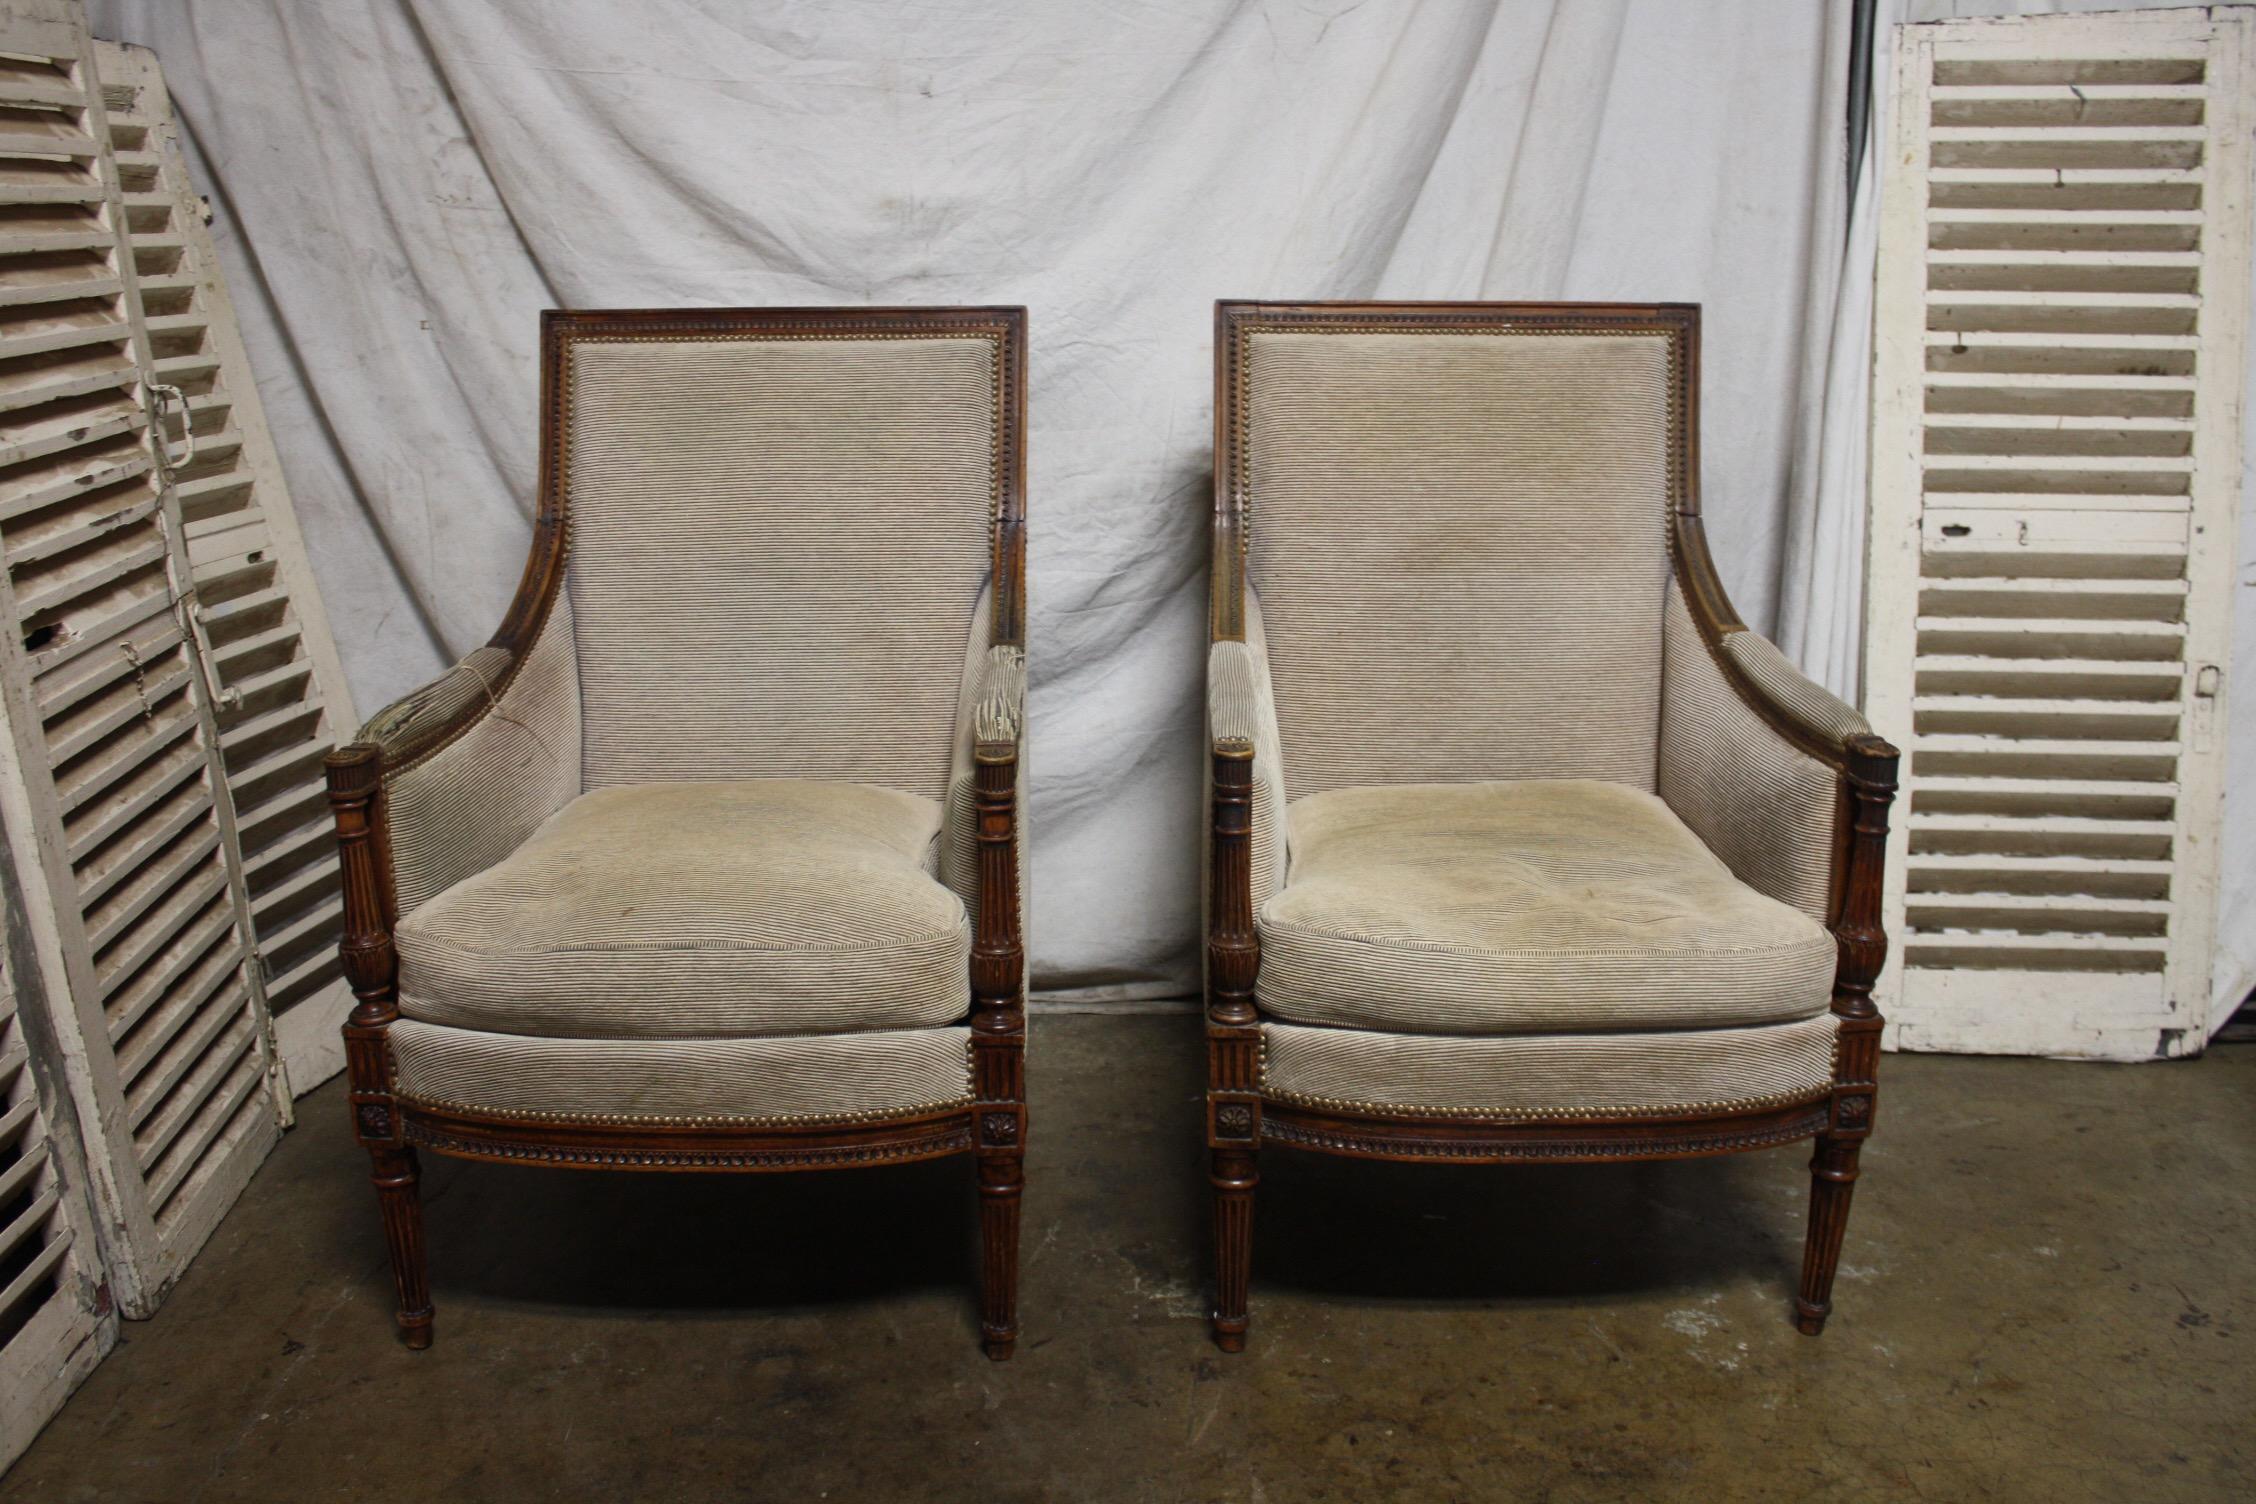 Late 19th century French pair of bergere chairs.